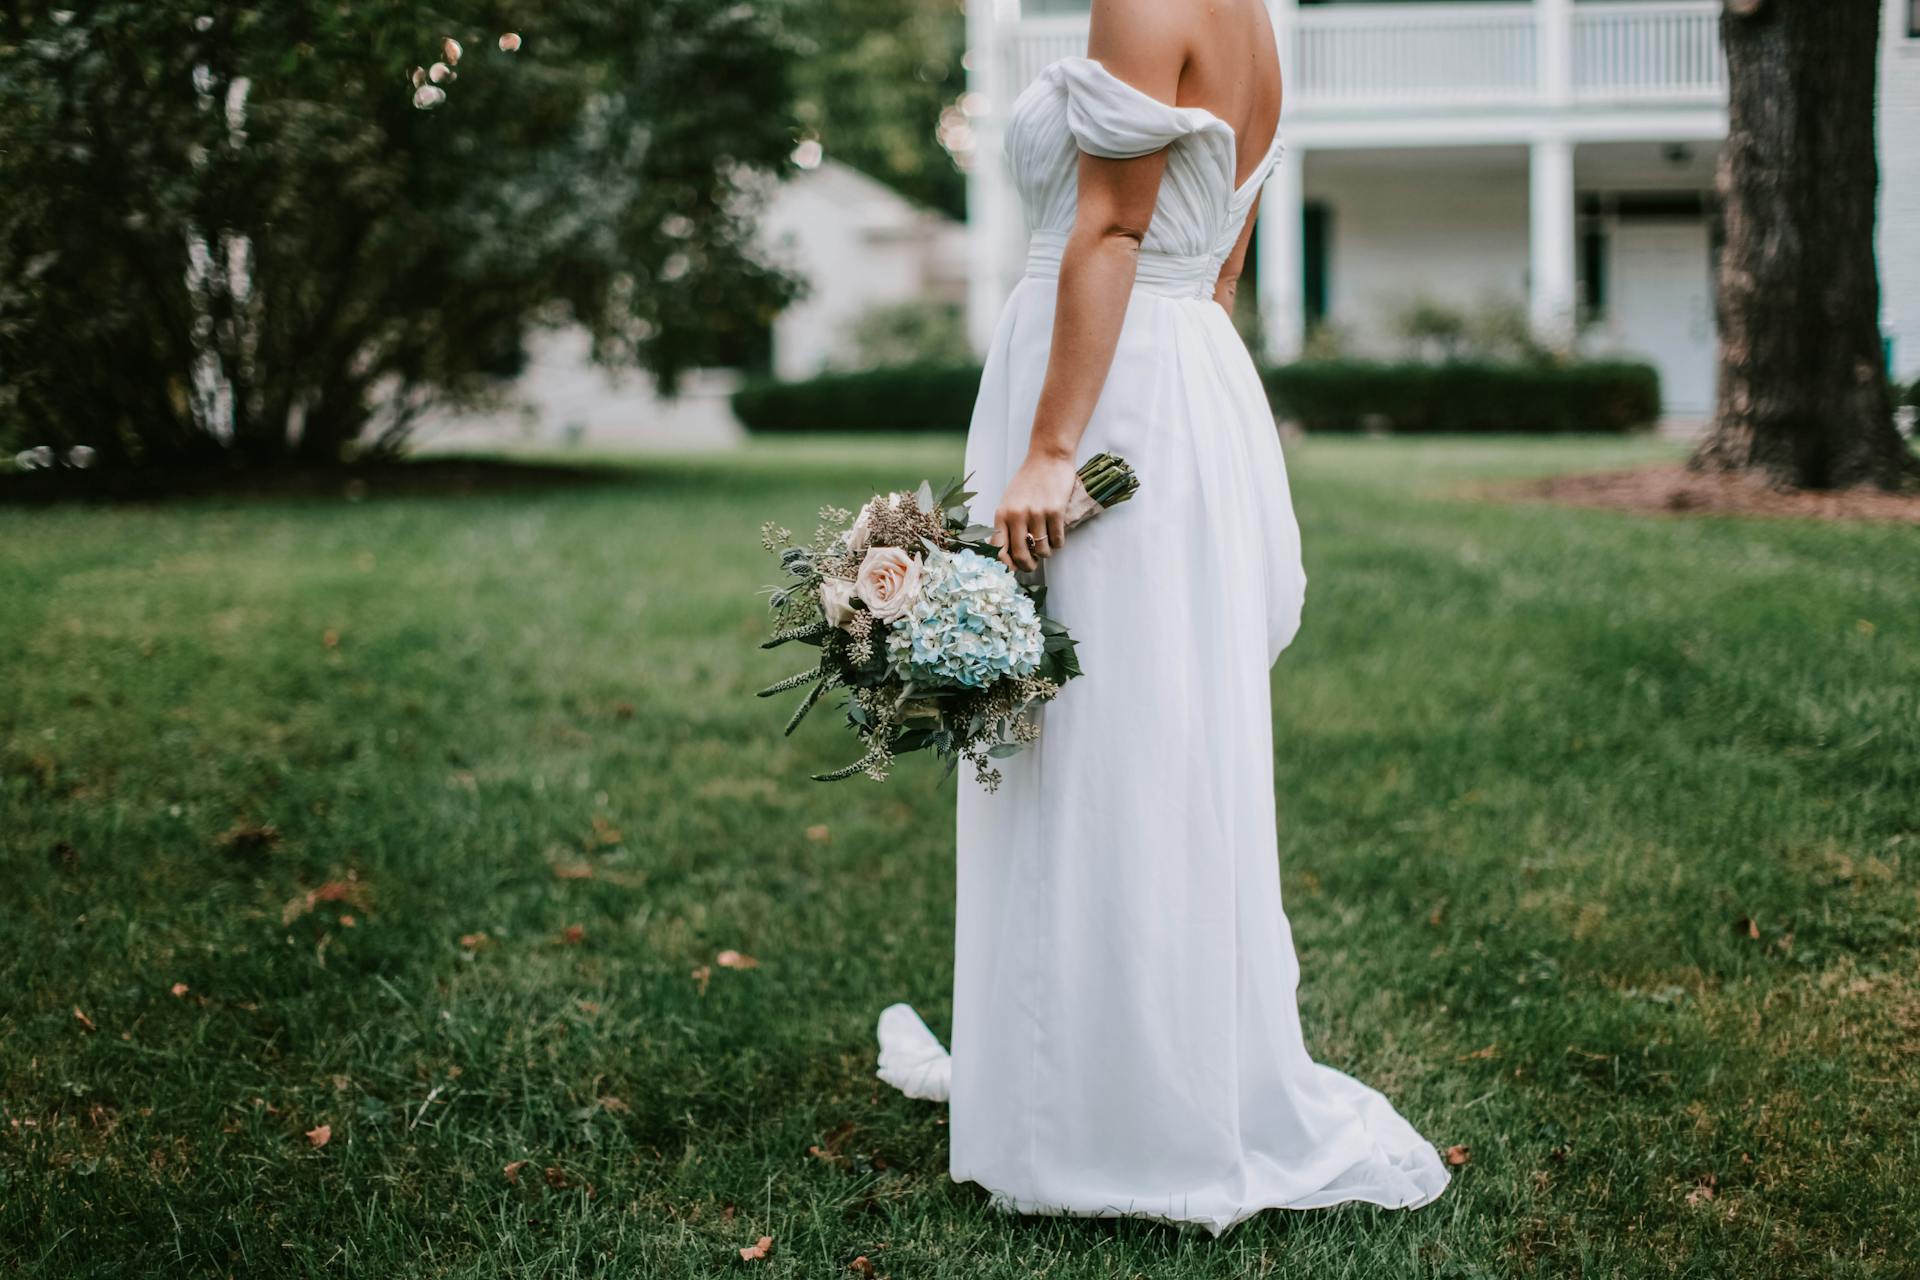 A bride standing on grass | Source: Pexels